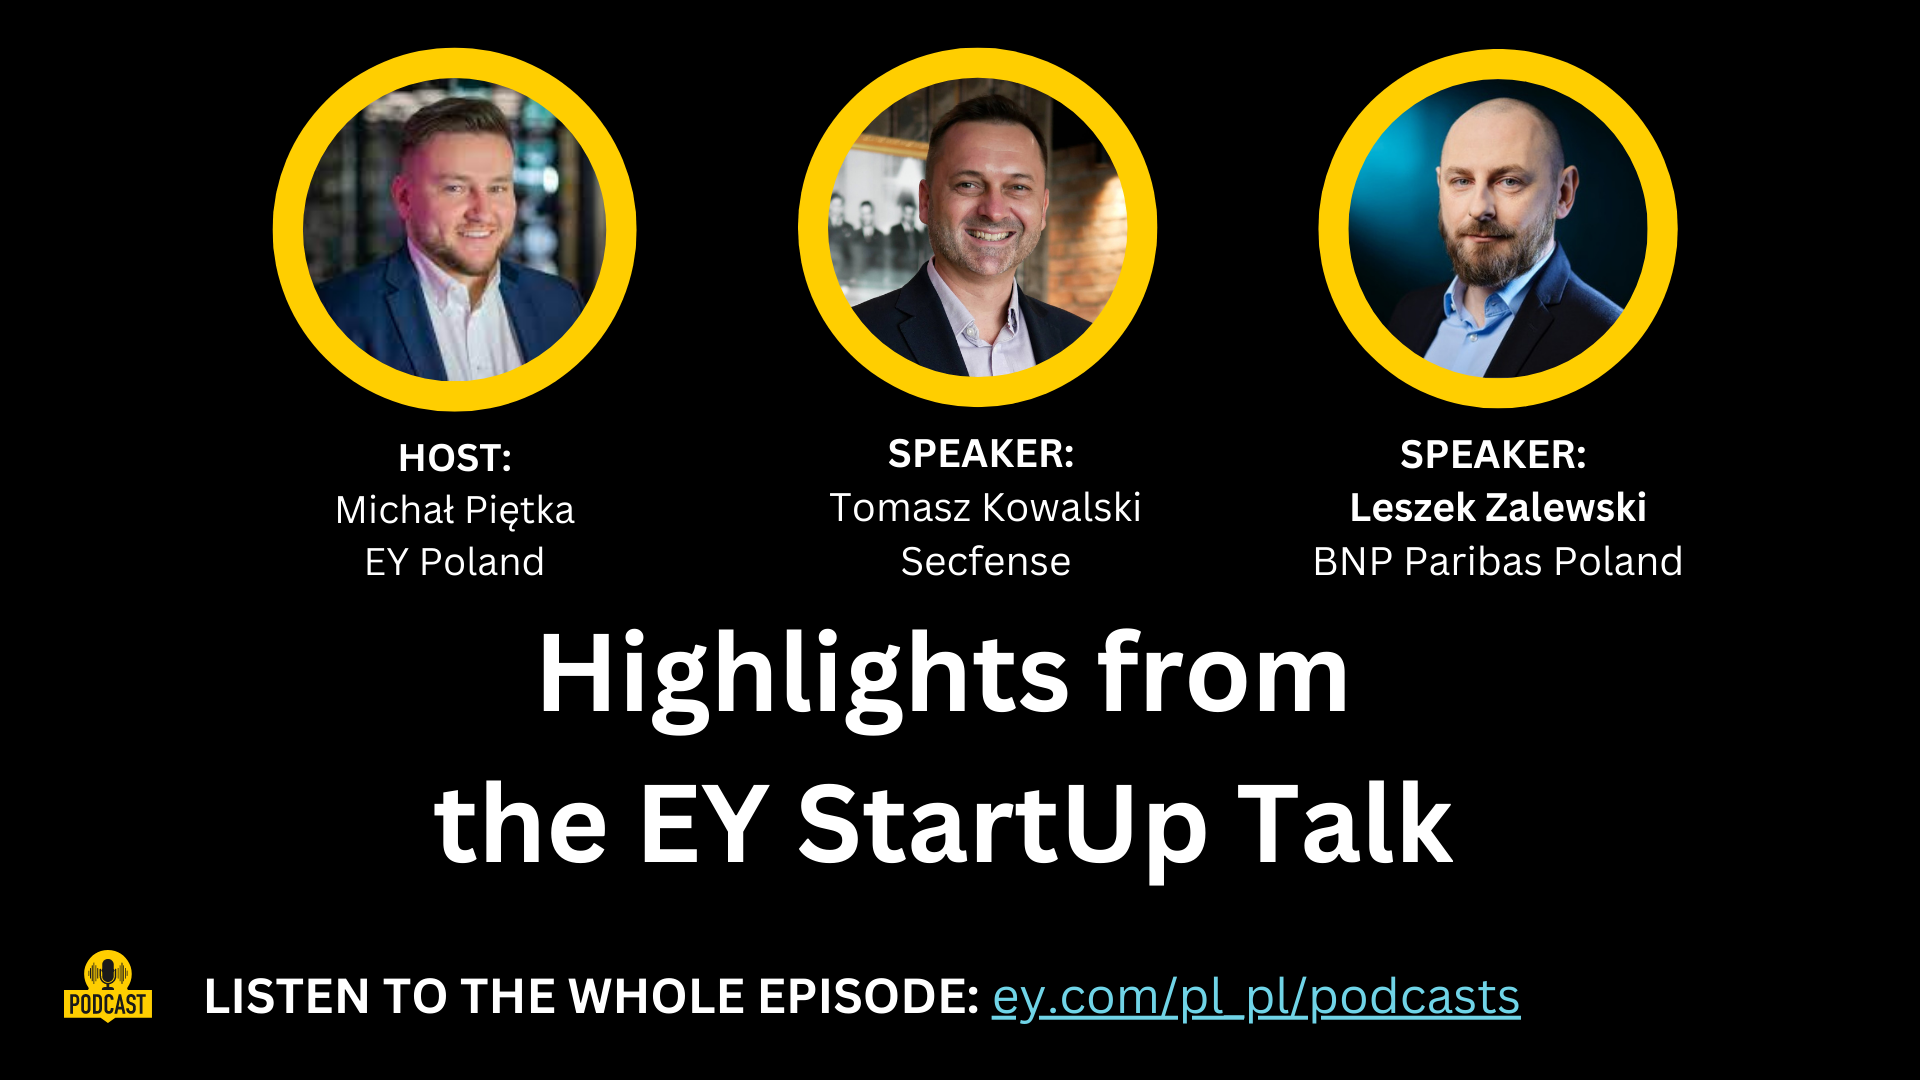 EY StartUp Talk with Secfense and BNP Paribas Poland